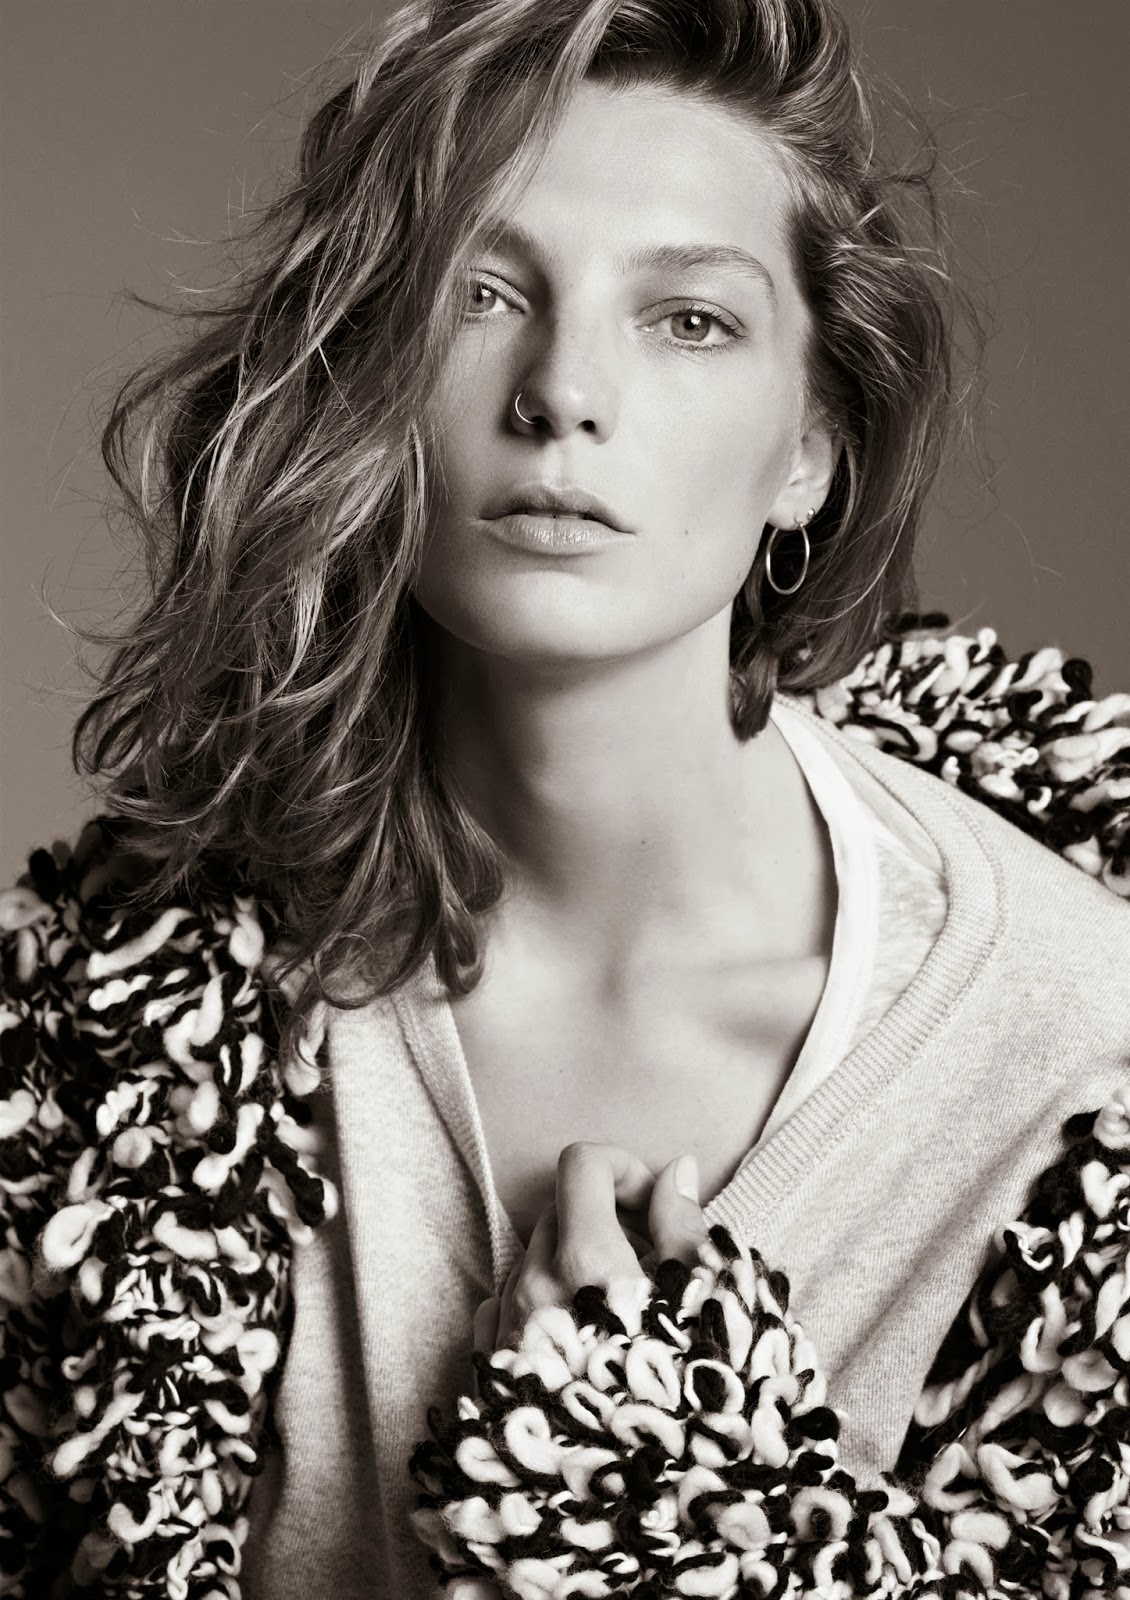 FearlessInTheJungle: Isabel Marant for H&M: top or slop?